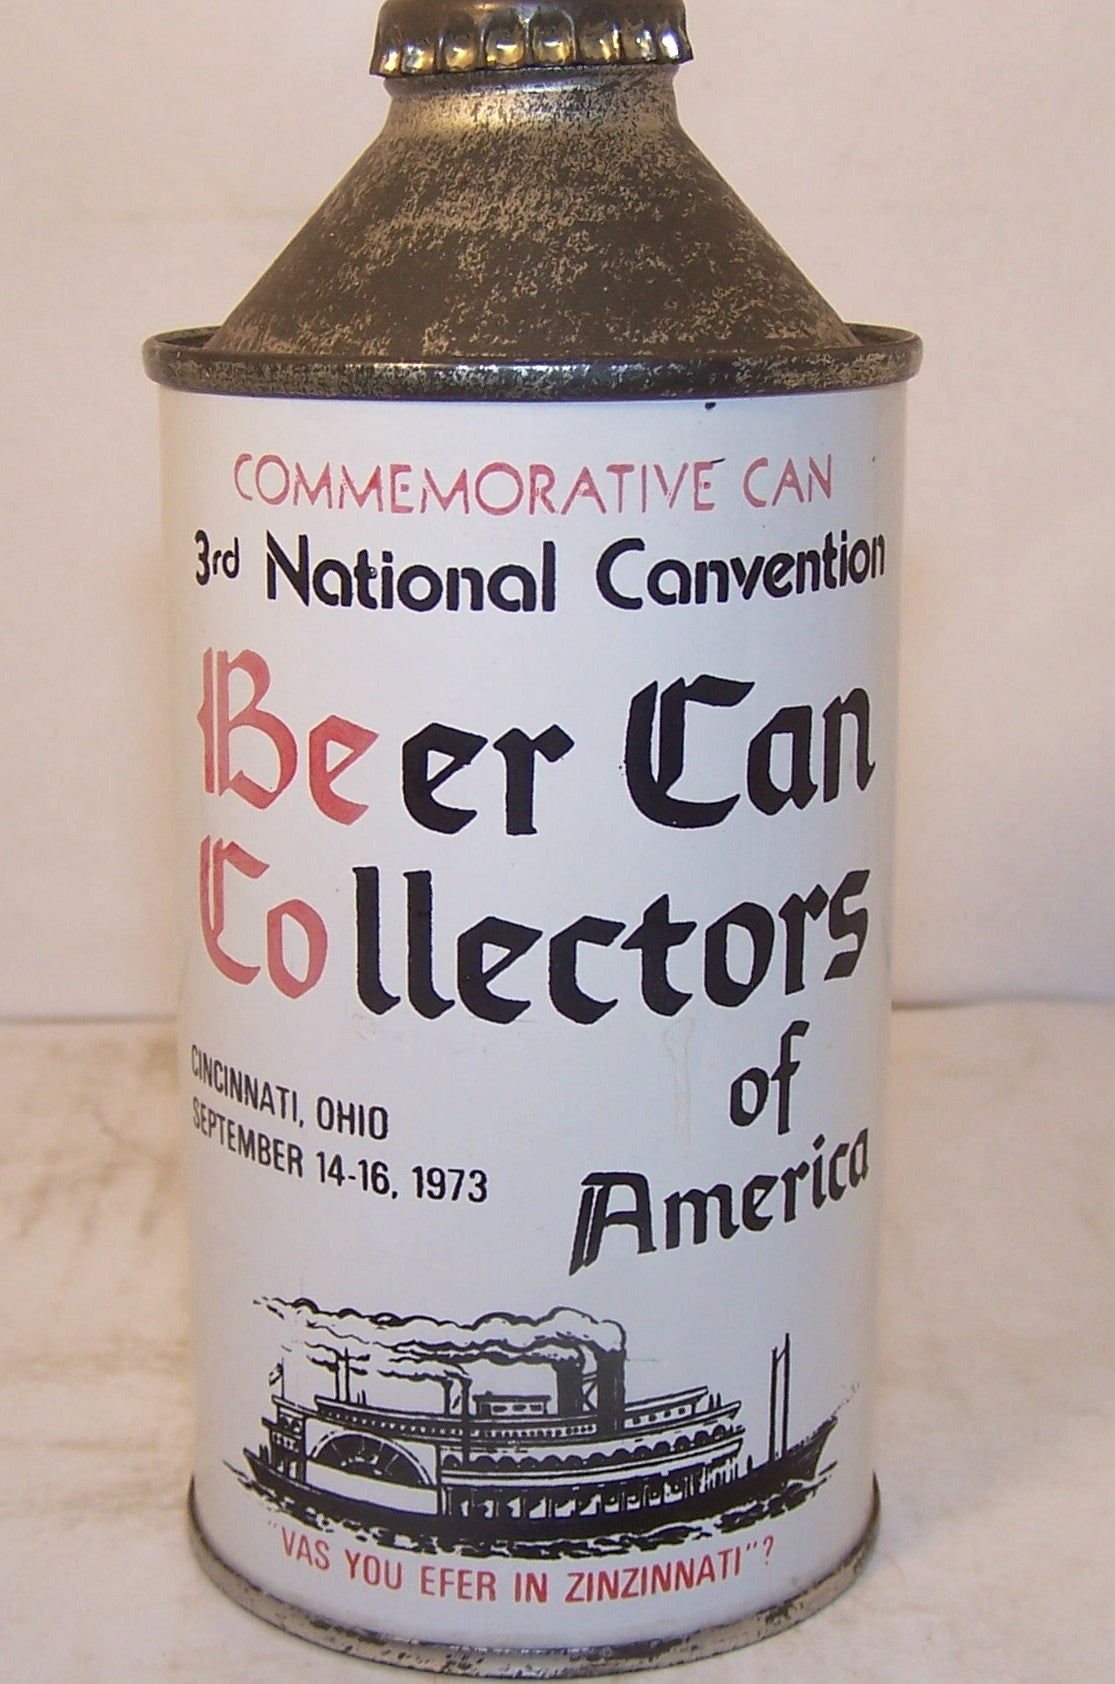 3rd National Canvention Beer Can Collectors of America Cinci Ohio Sold on 09/15/17